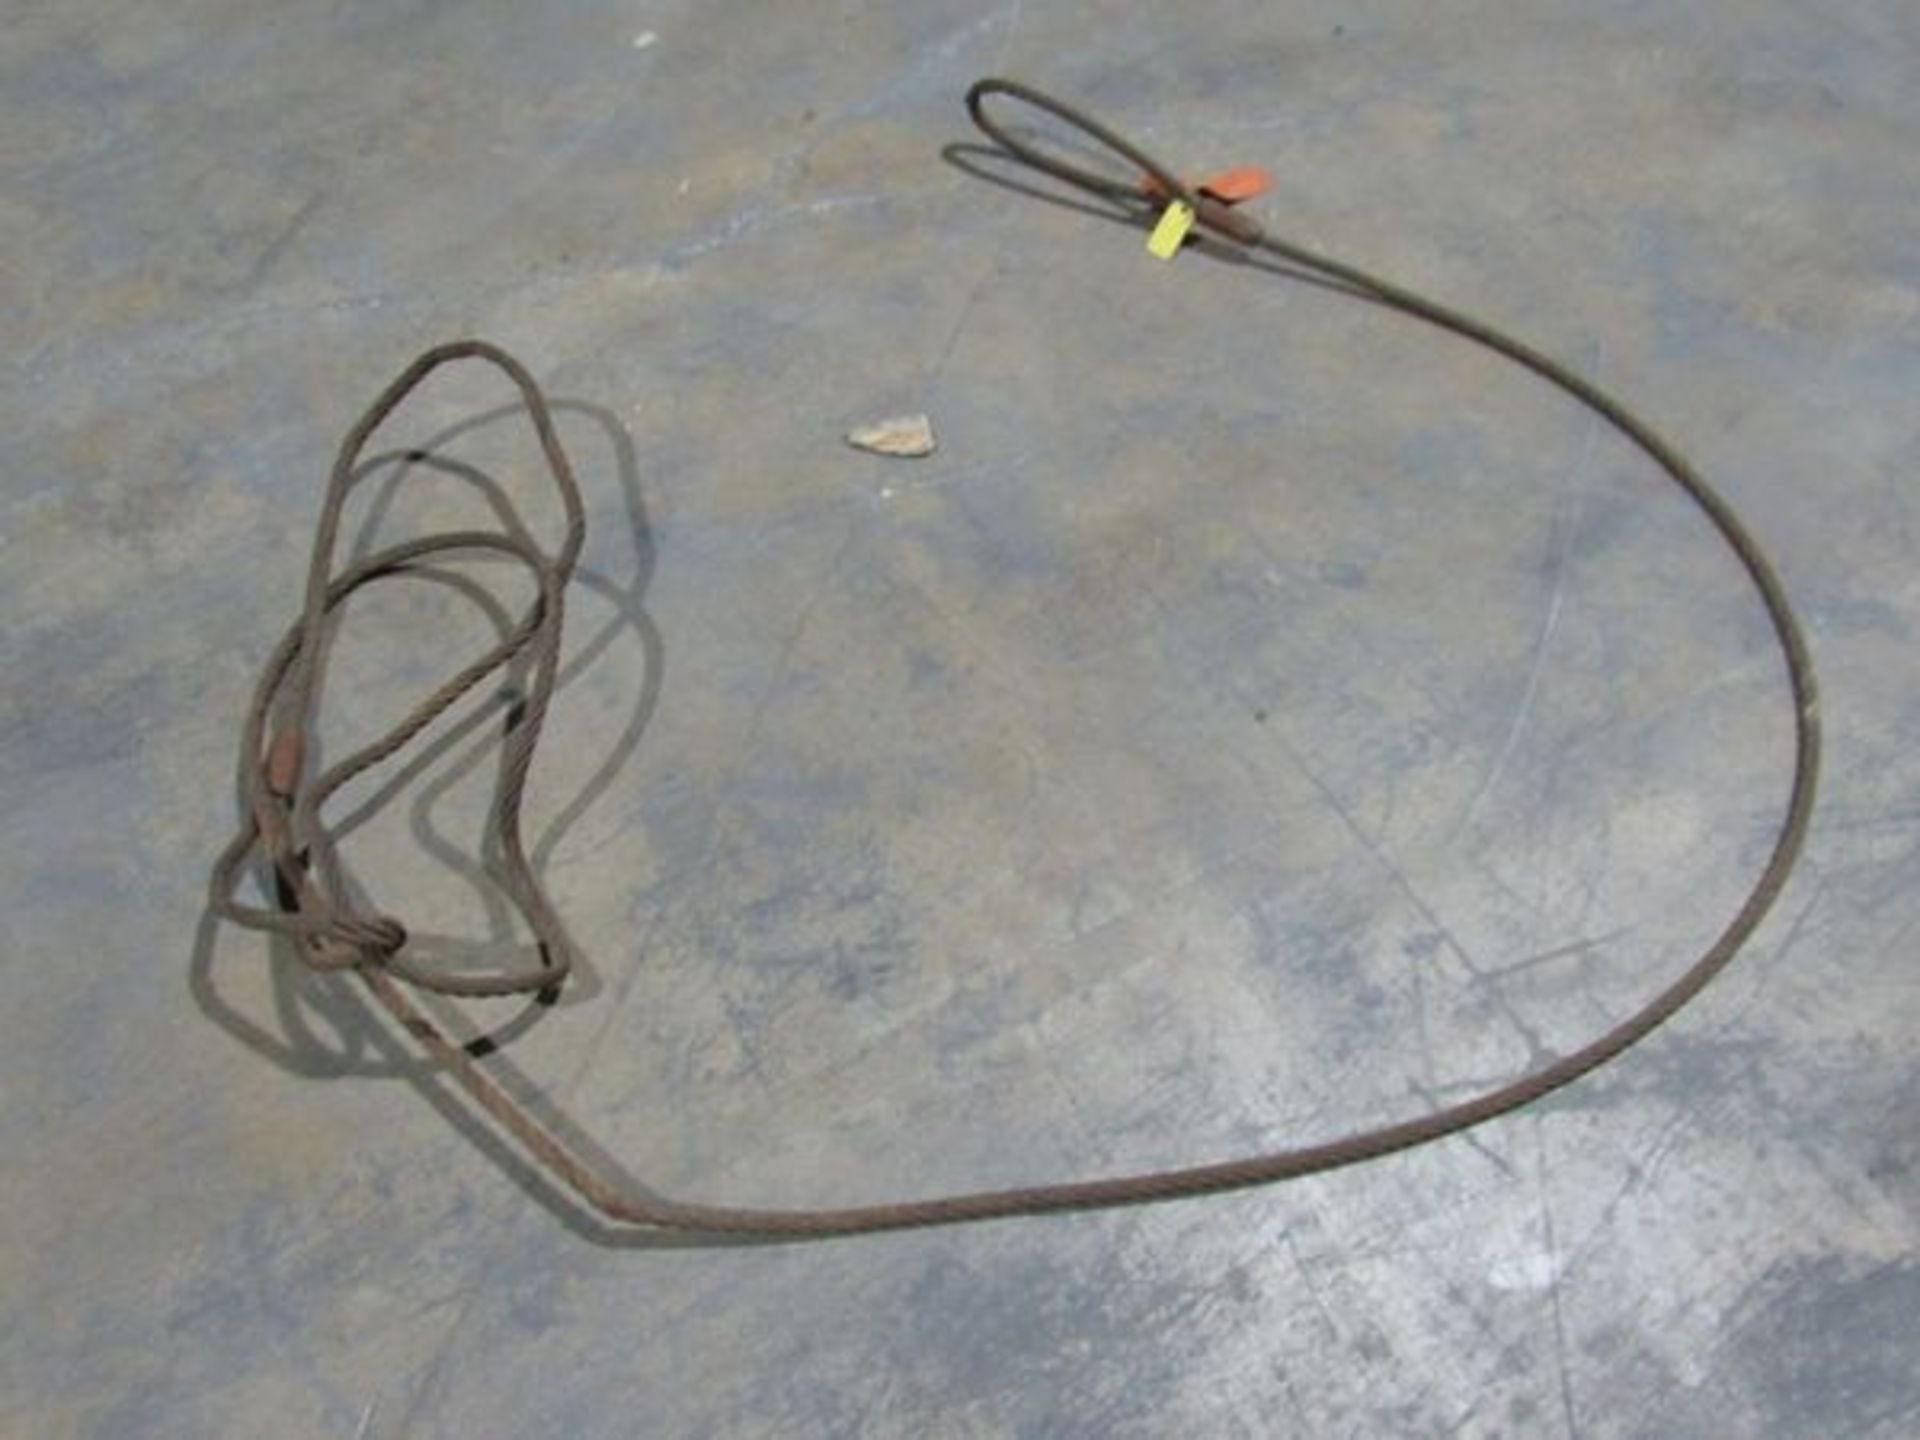 Assorted Braided Steel Lifting Slings- MFR - Total Tool, Lindi Sling Sizes Range From 3/8" to 1" - Image 5 of 20